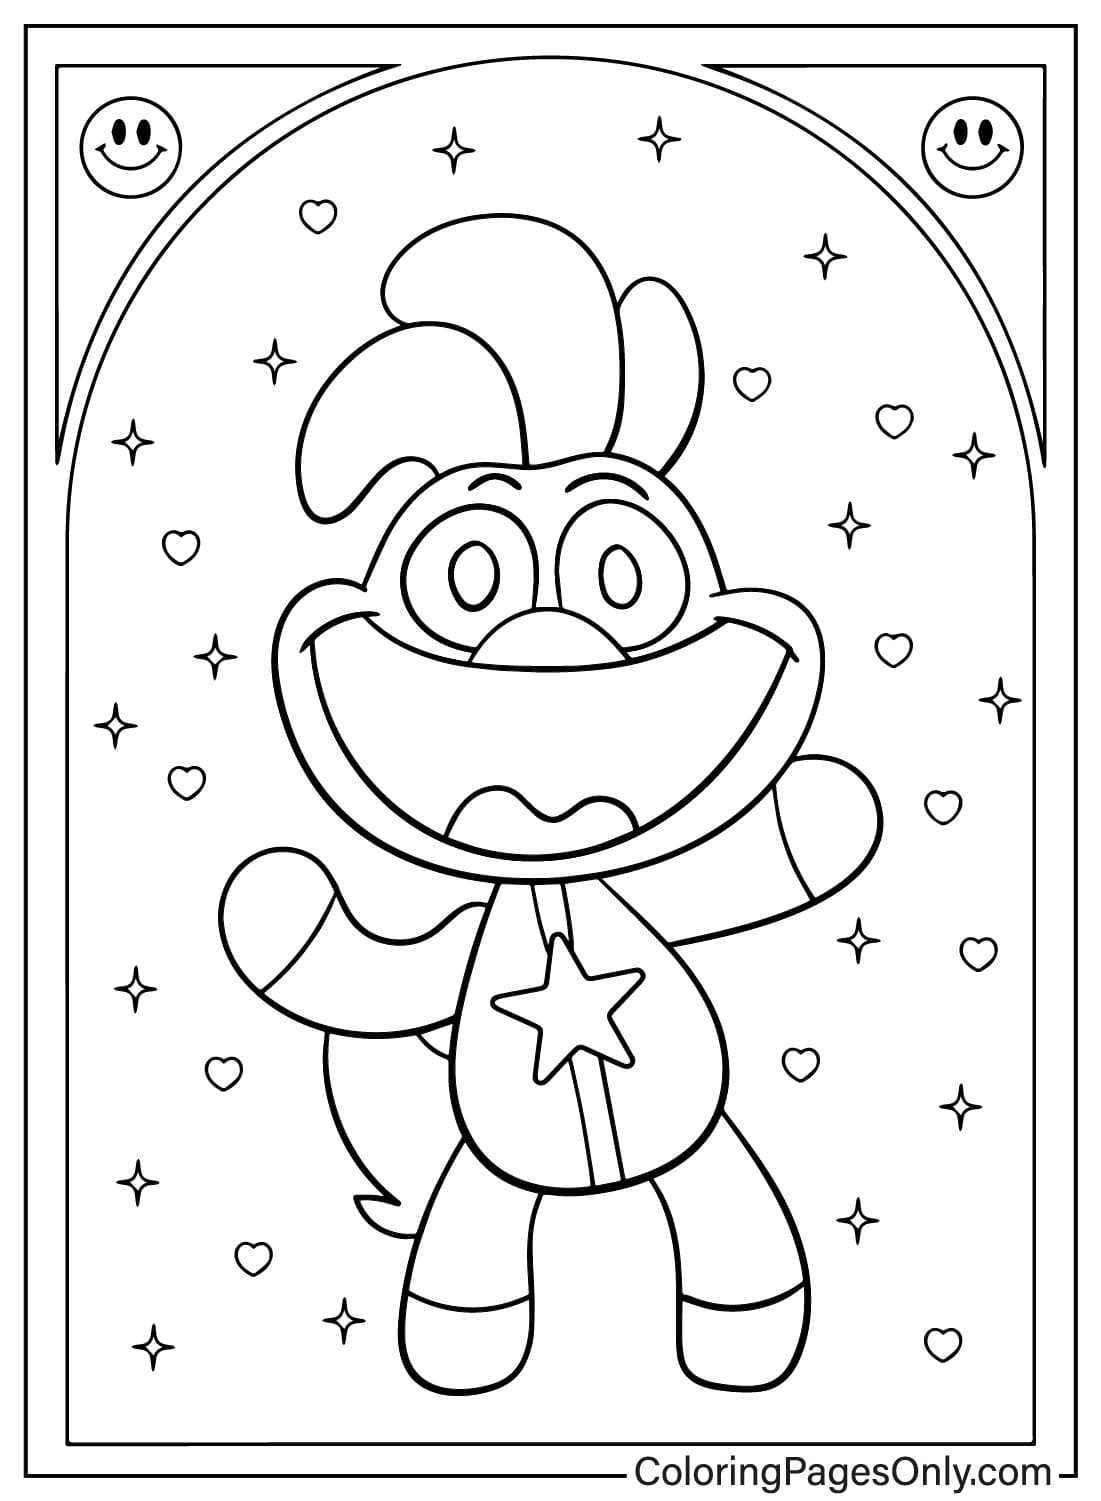 Happy KickinChicken Coloring Page from KickinChicken